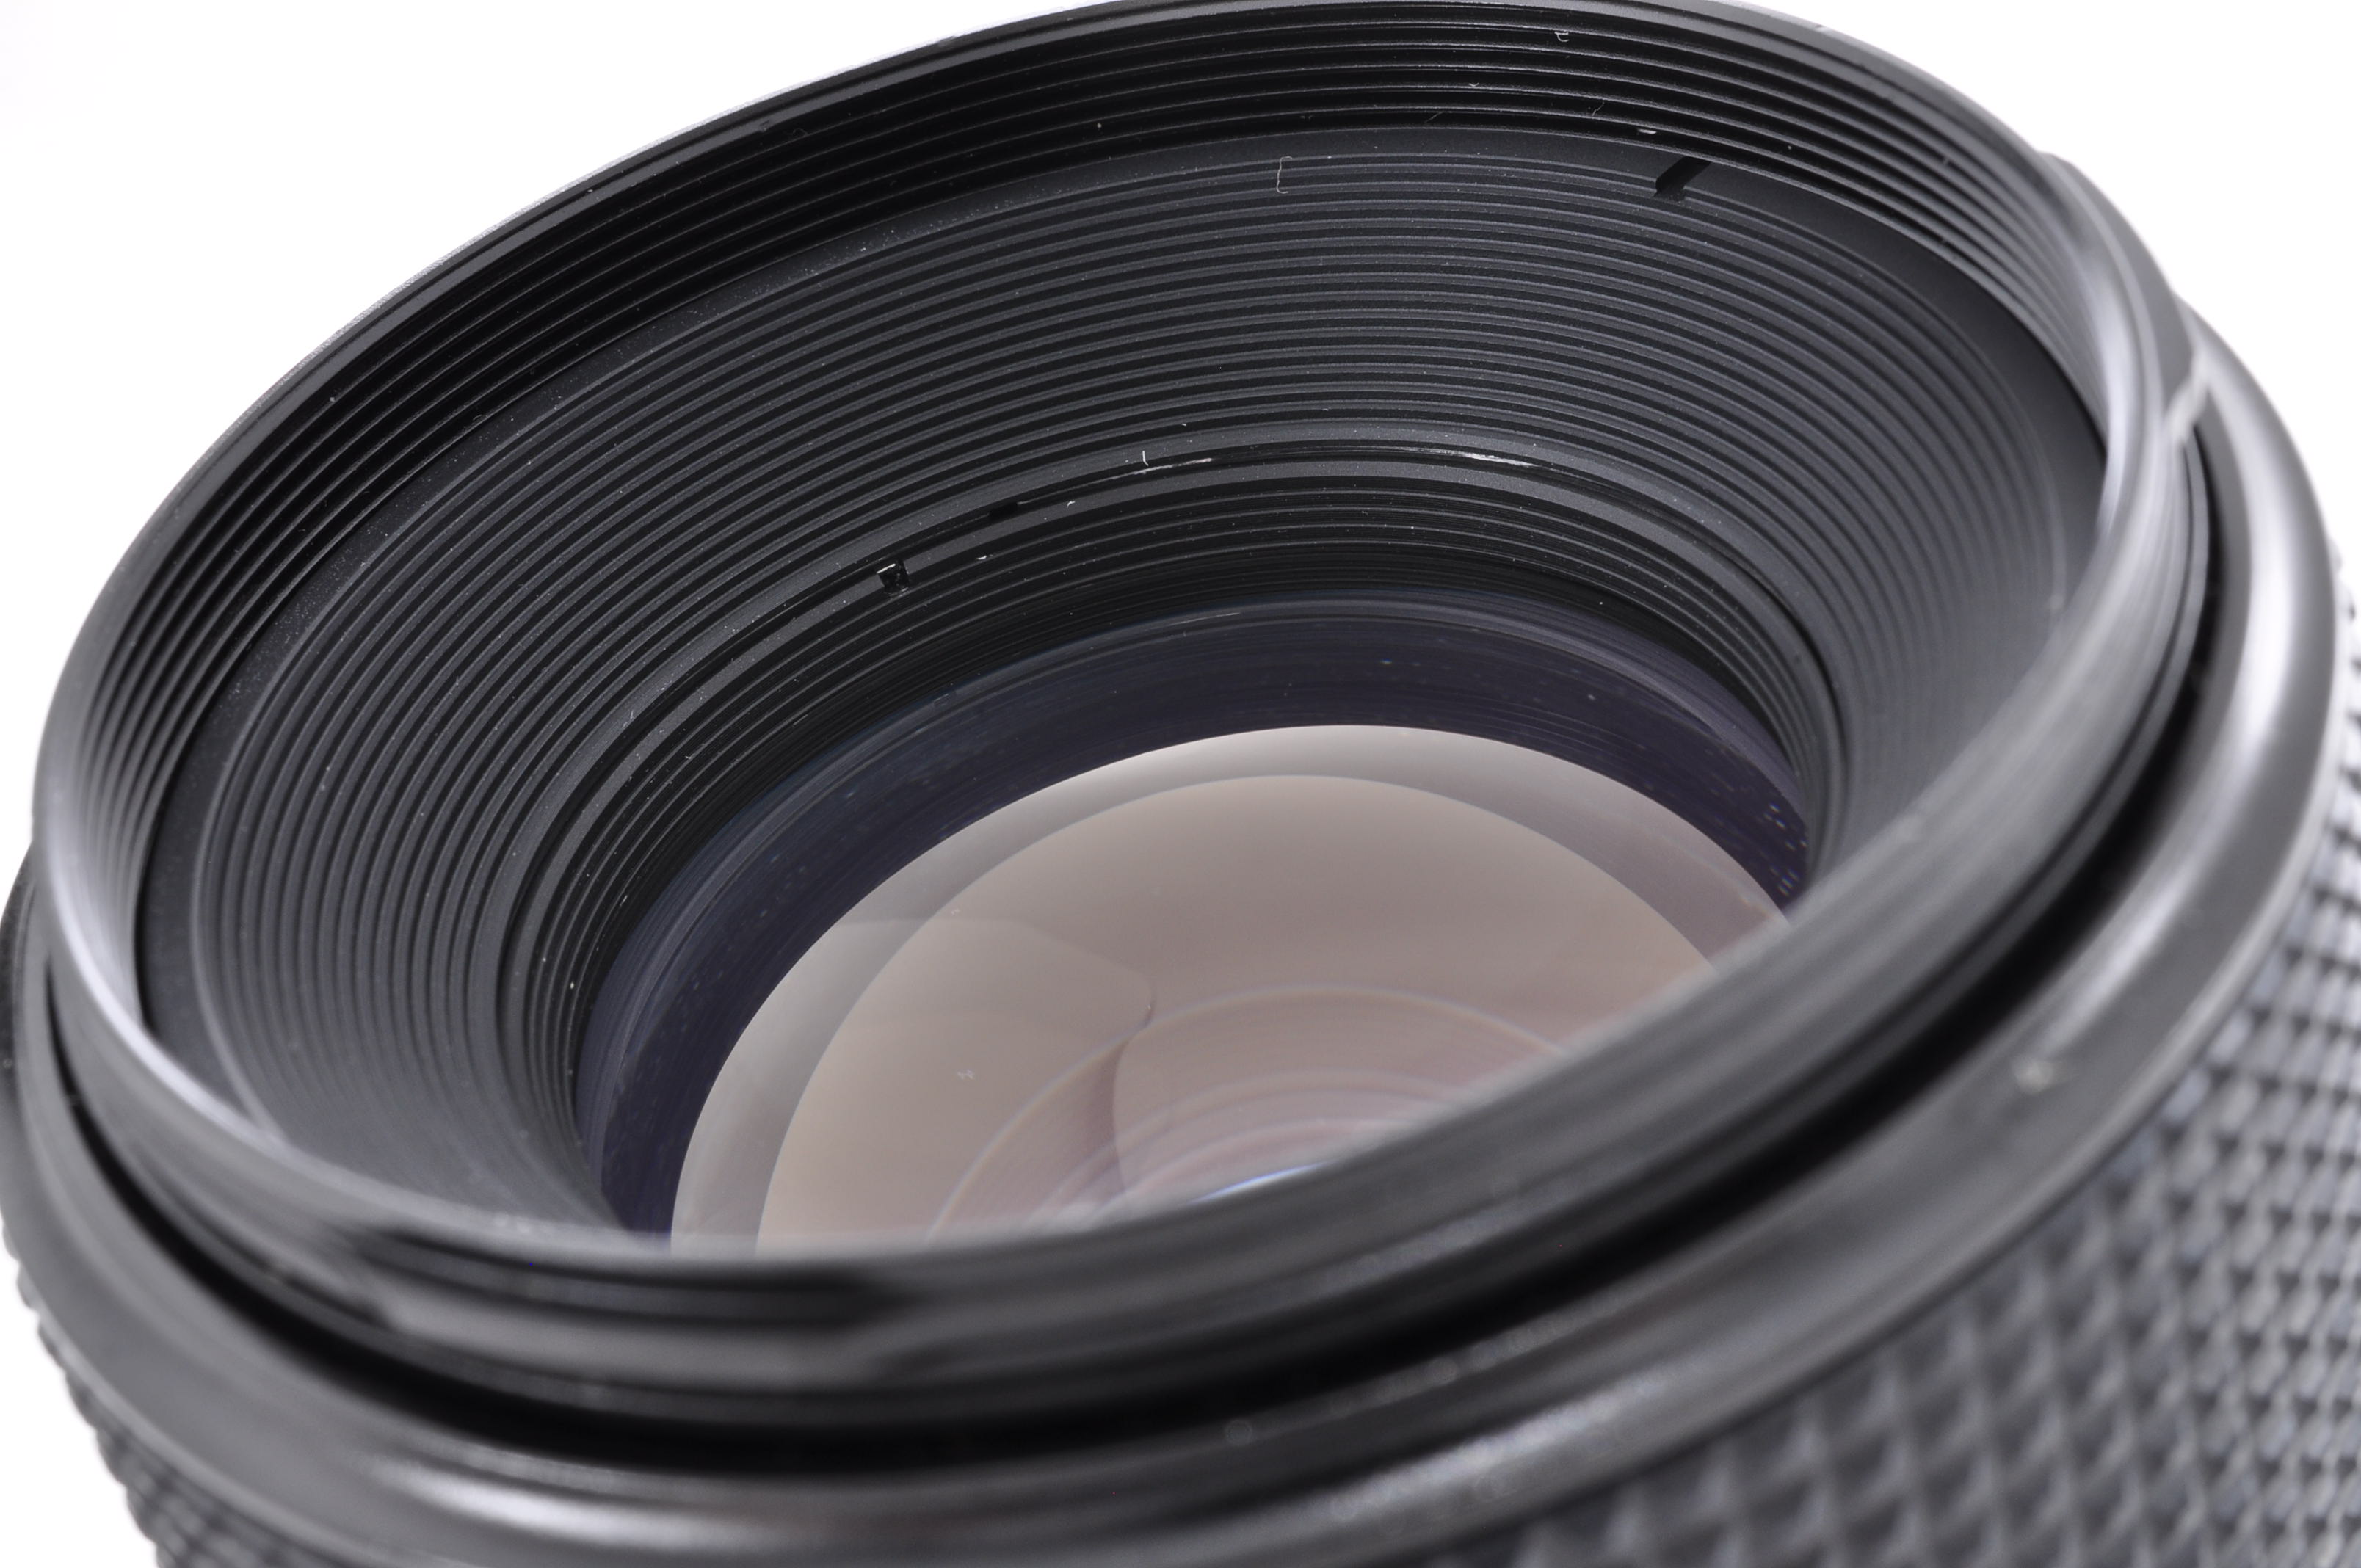 Tamron SP 90mm F/2.5 MF Macro Lens For Olympus OM Mount [Near Mint-] From Japan img09